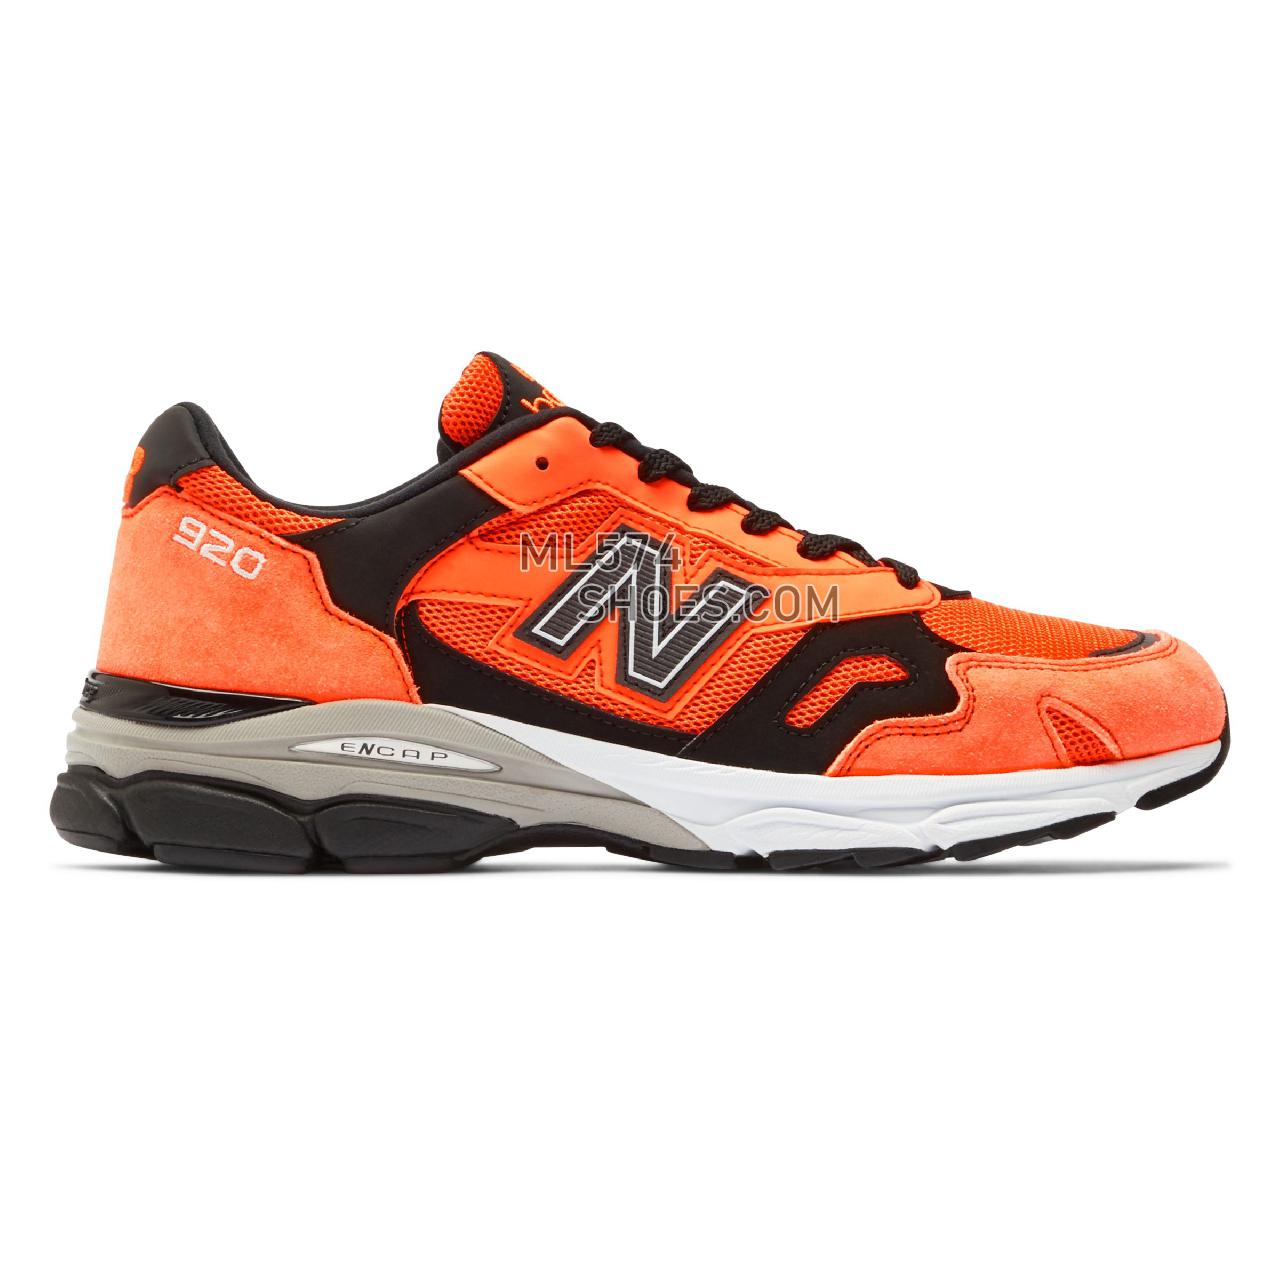 New Balance Made in UK 920 - Men's Made in USA And UK Sneakers - Orange with Black and White - M920NEO